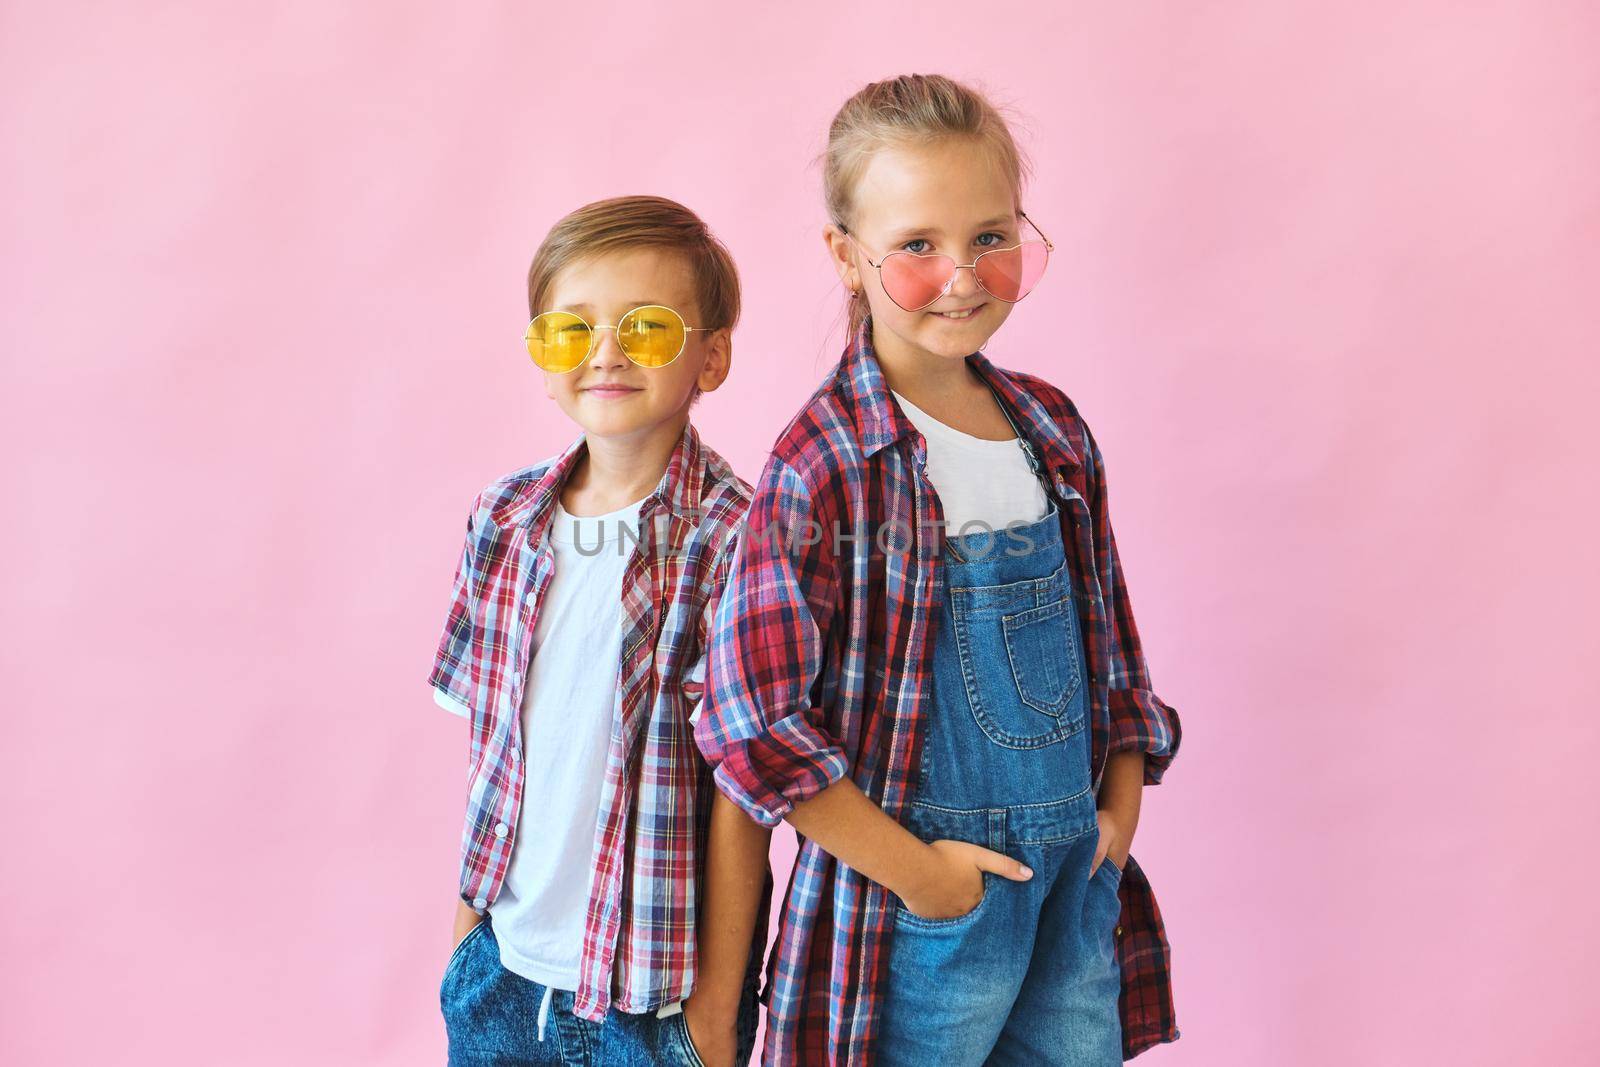 Cute stylish little girl and boy in color sunglasses dressed in plaid shirts, looking at camera and laughing while standing on pink background with copy space.